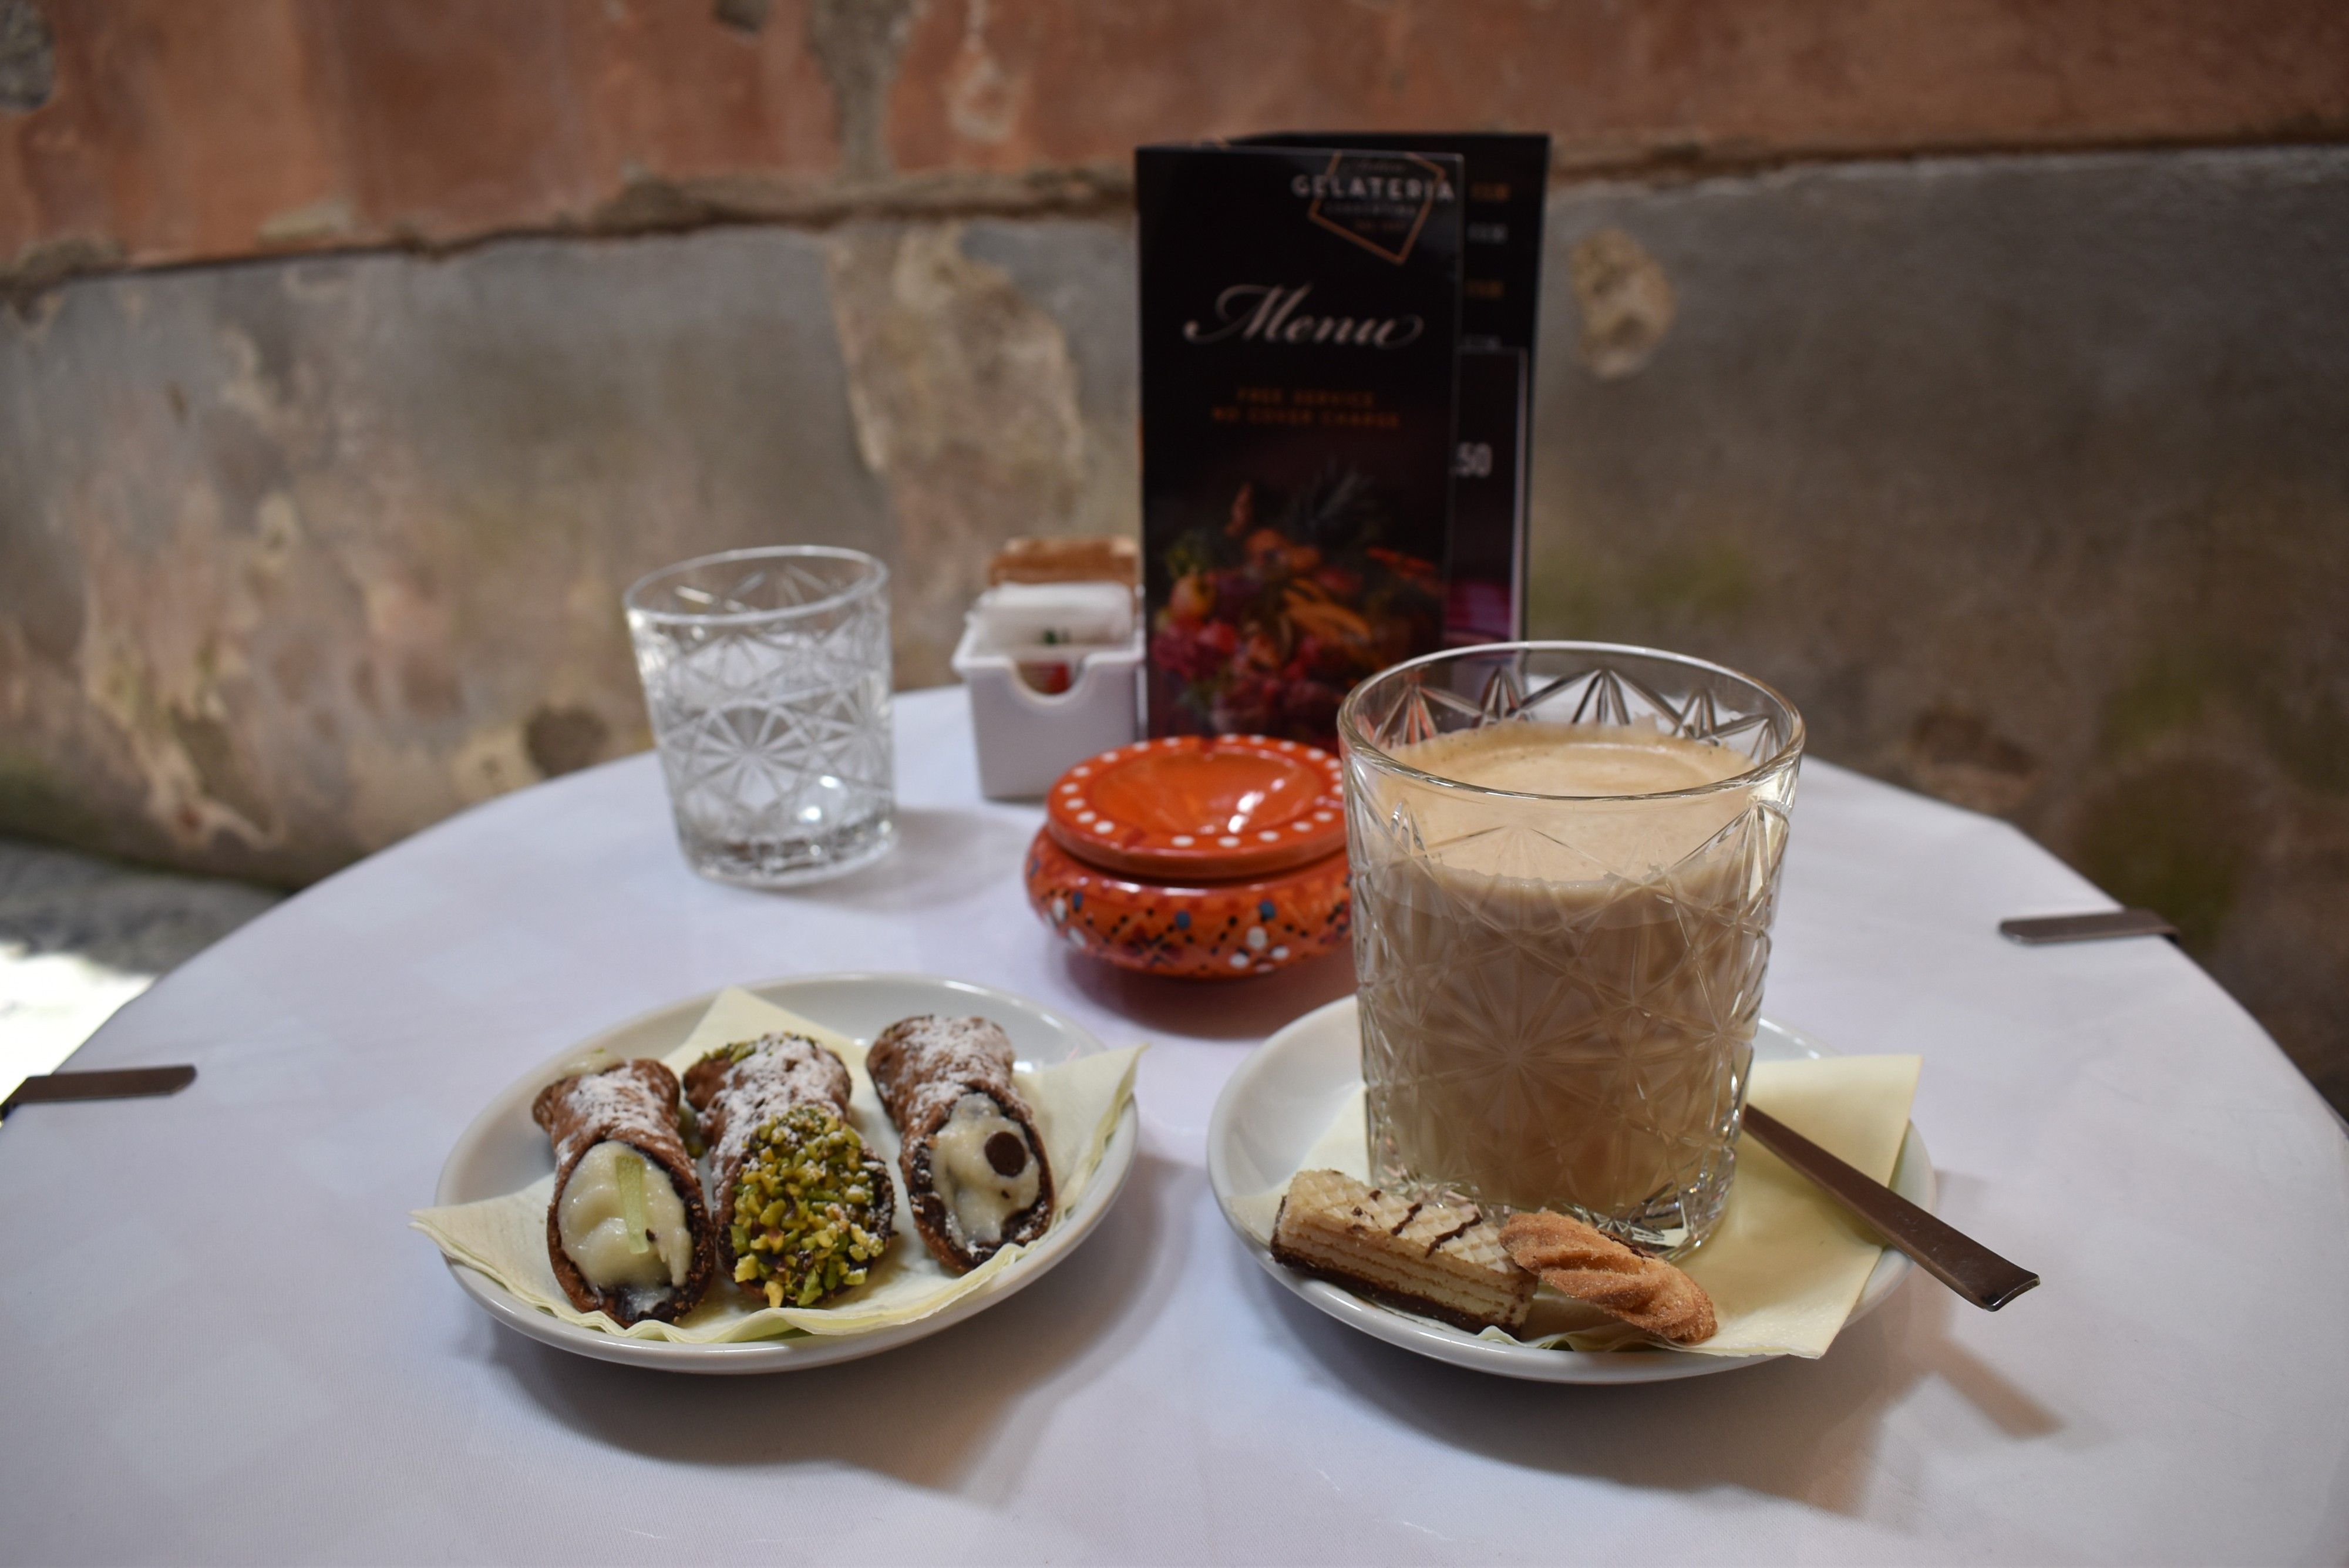 Caption: A photo of three Italian cannoli pastries on a plate and a cup of caffe latte served with biscuits on the side, arranged on a table outside a café. (Local Guide @MoniDi)